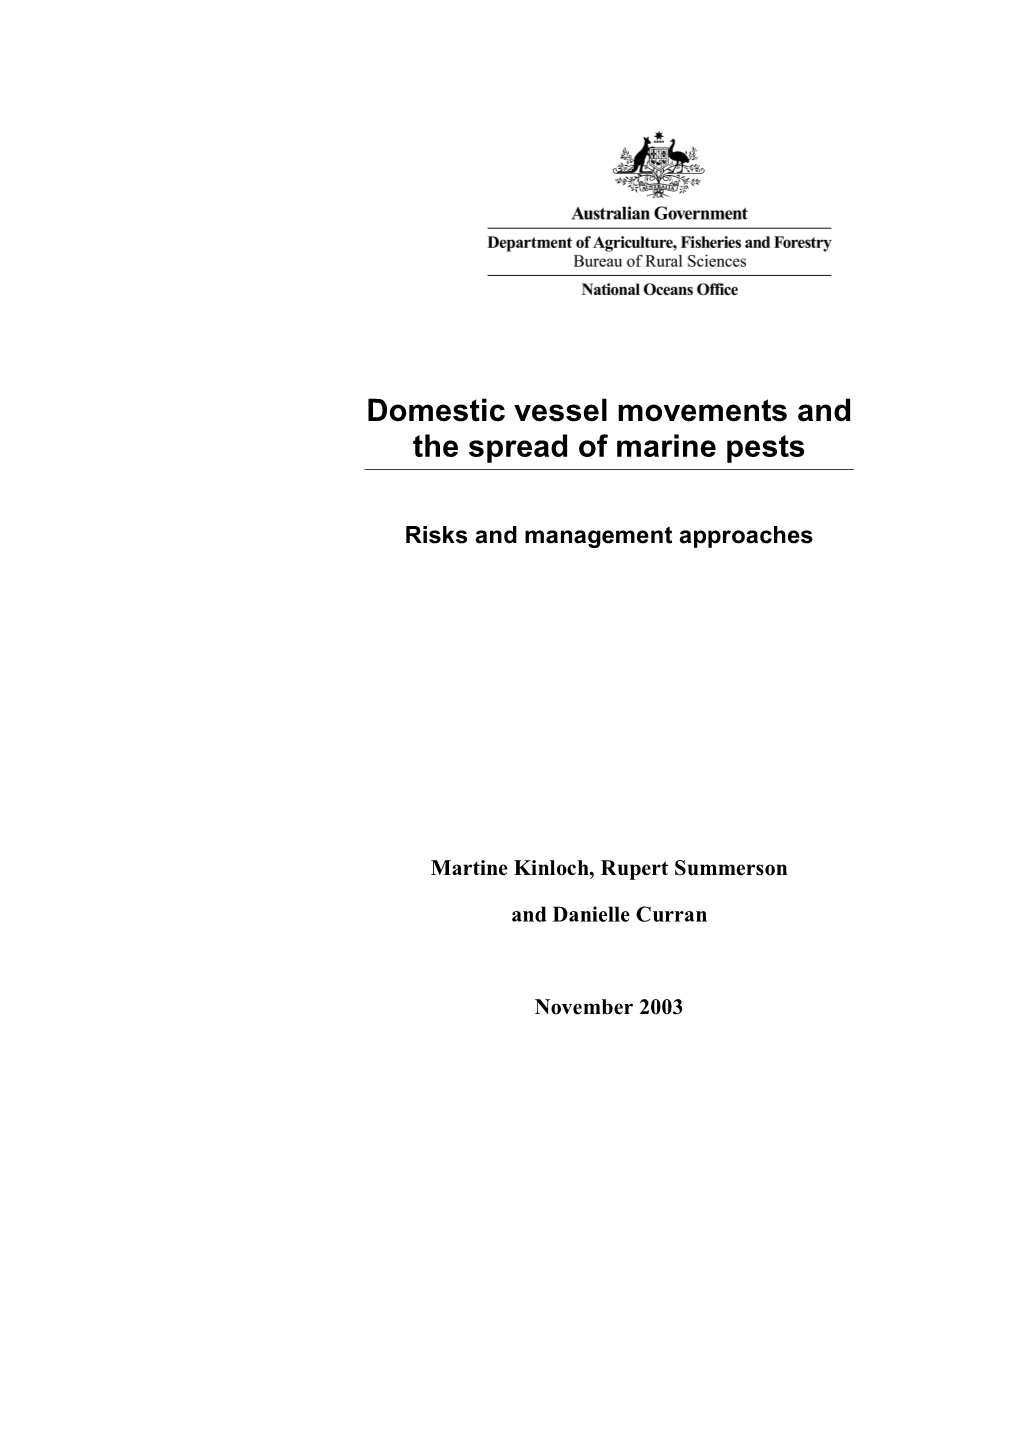 Domestic Vessel Movements and the Spread of Marine Pests